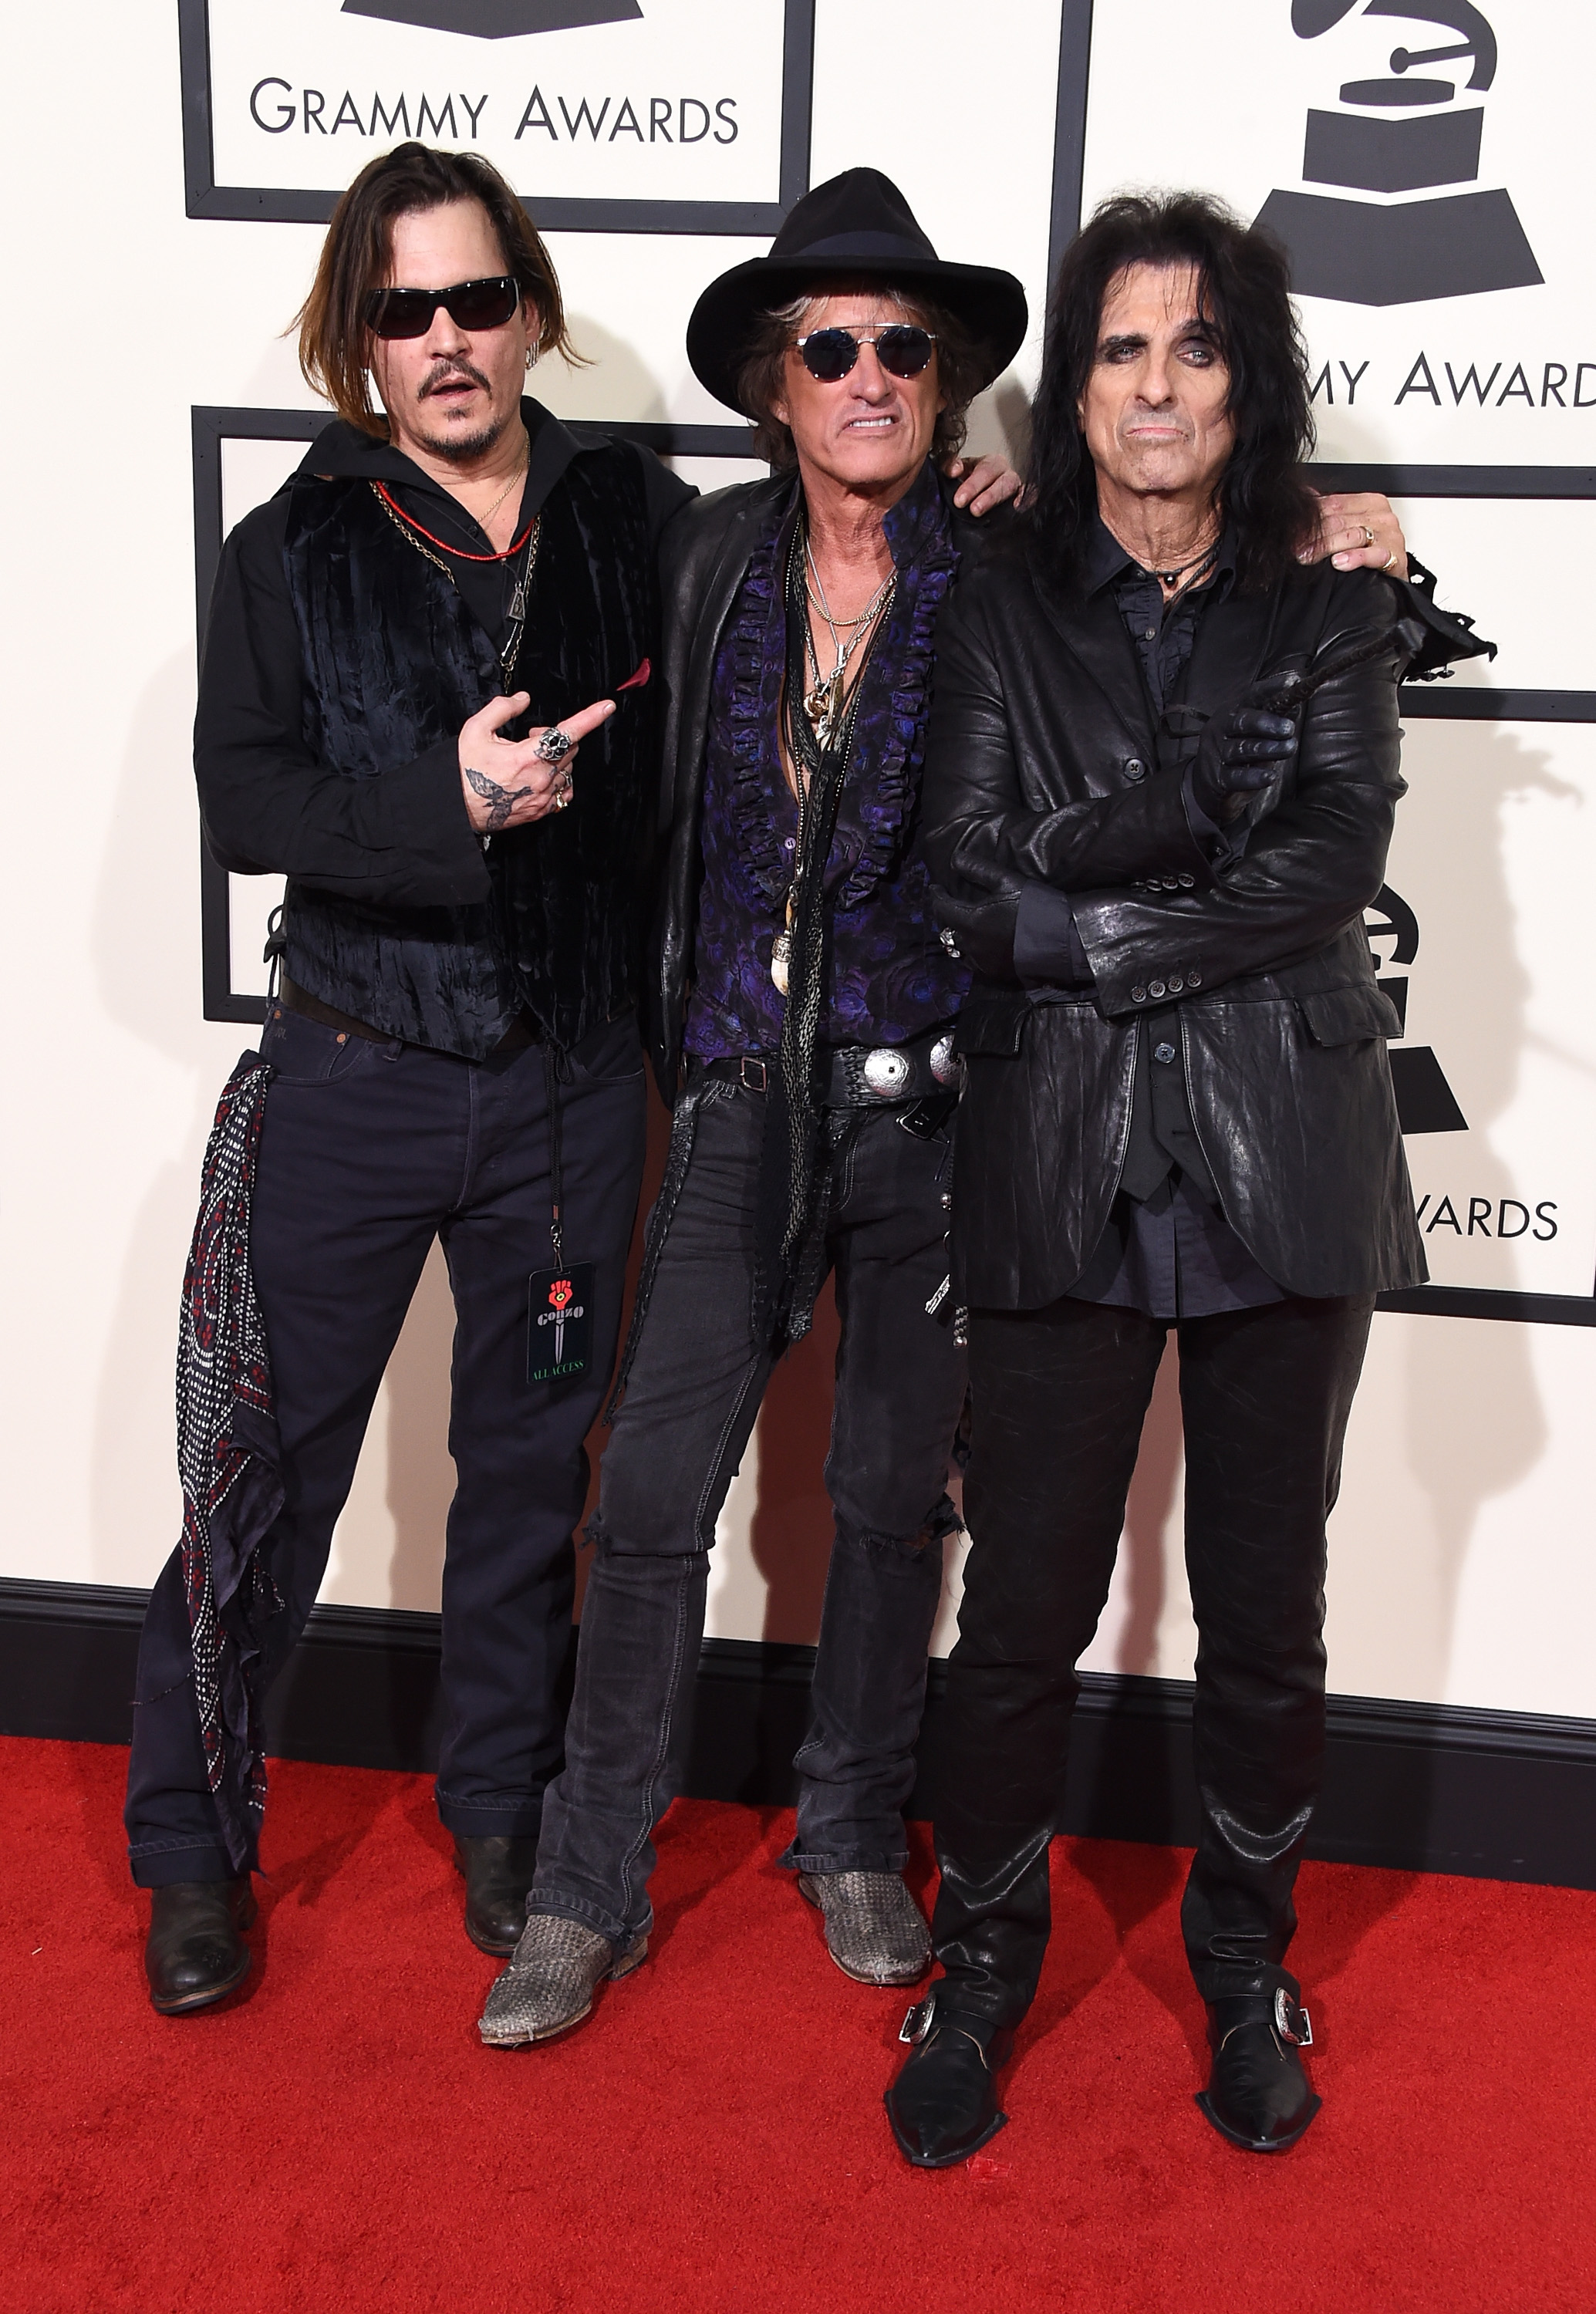 From left: Johnny Depp, Joe Perry and Alice Cooper of The Hollywood Vampires attend the 58th GRAMMY Awards at Staples Center on Feb. 15, 2016 in Los Angeles.